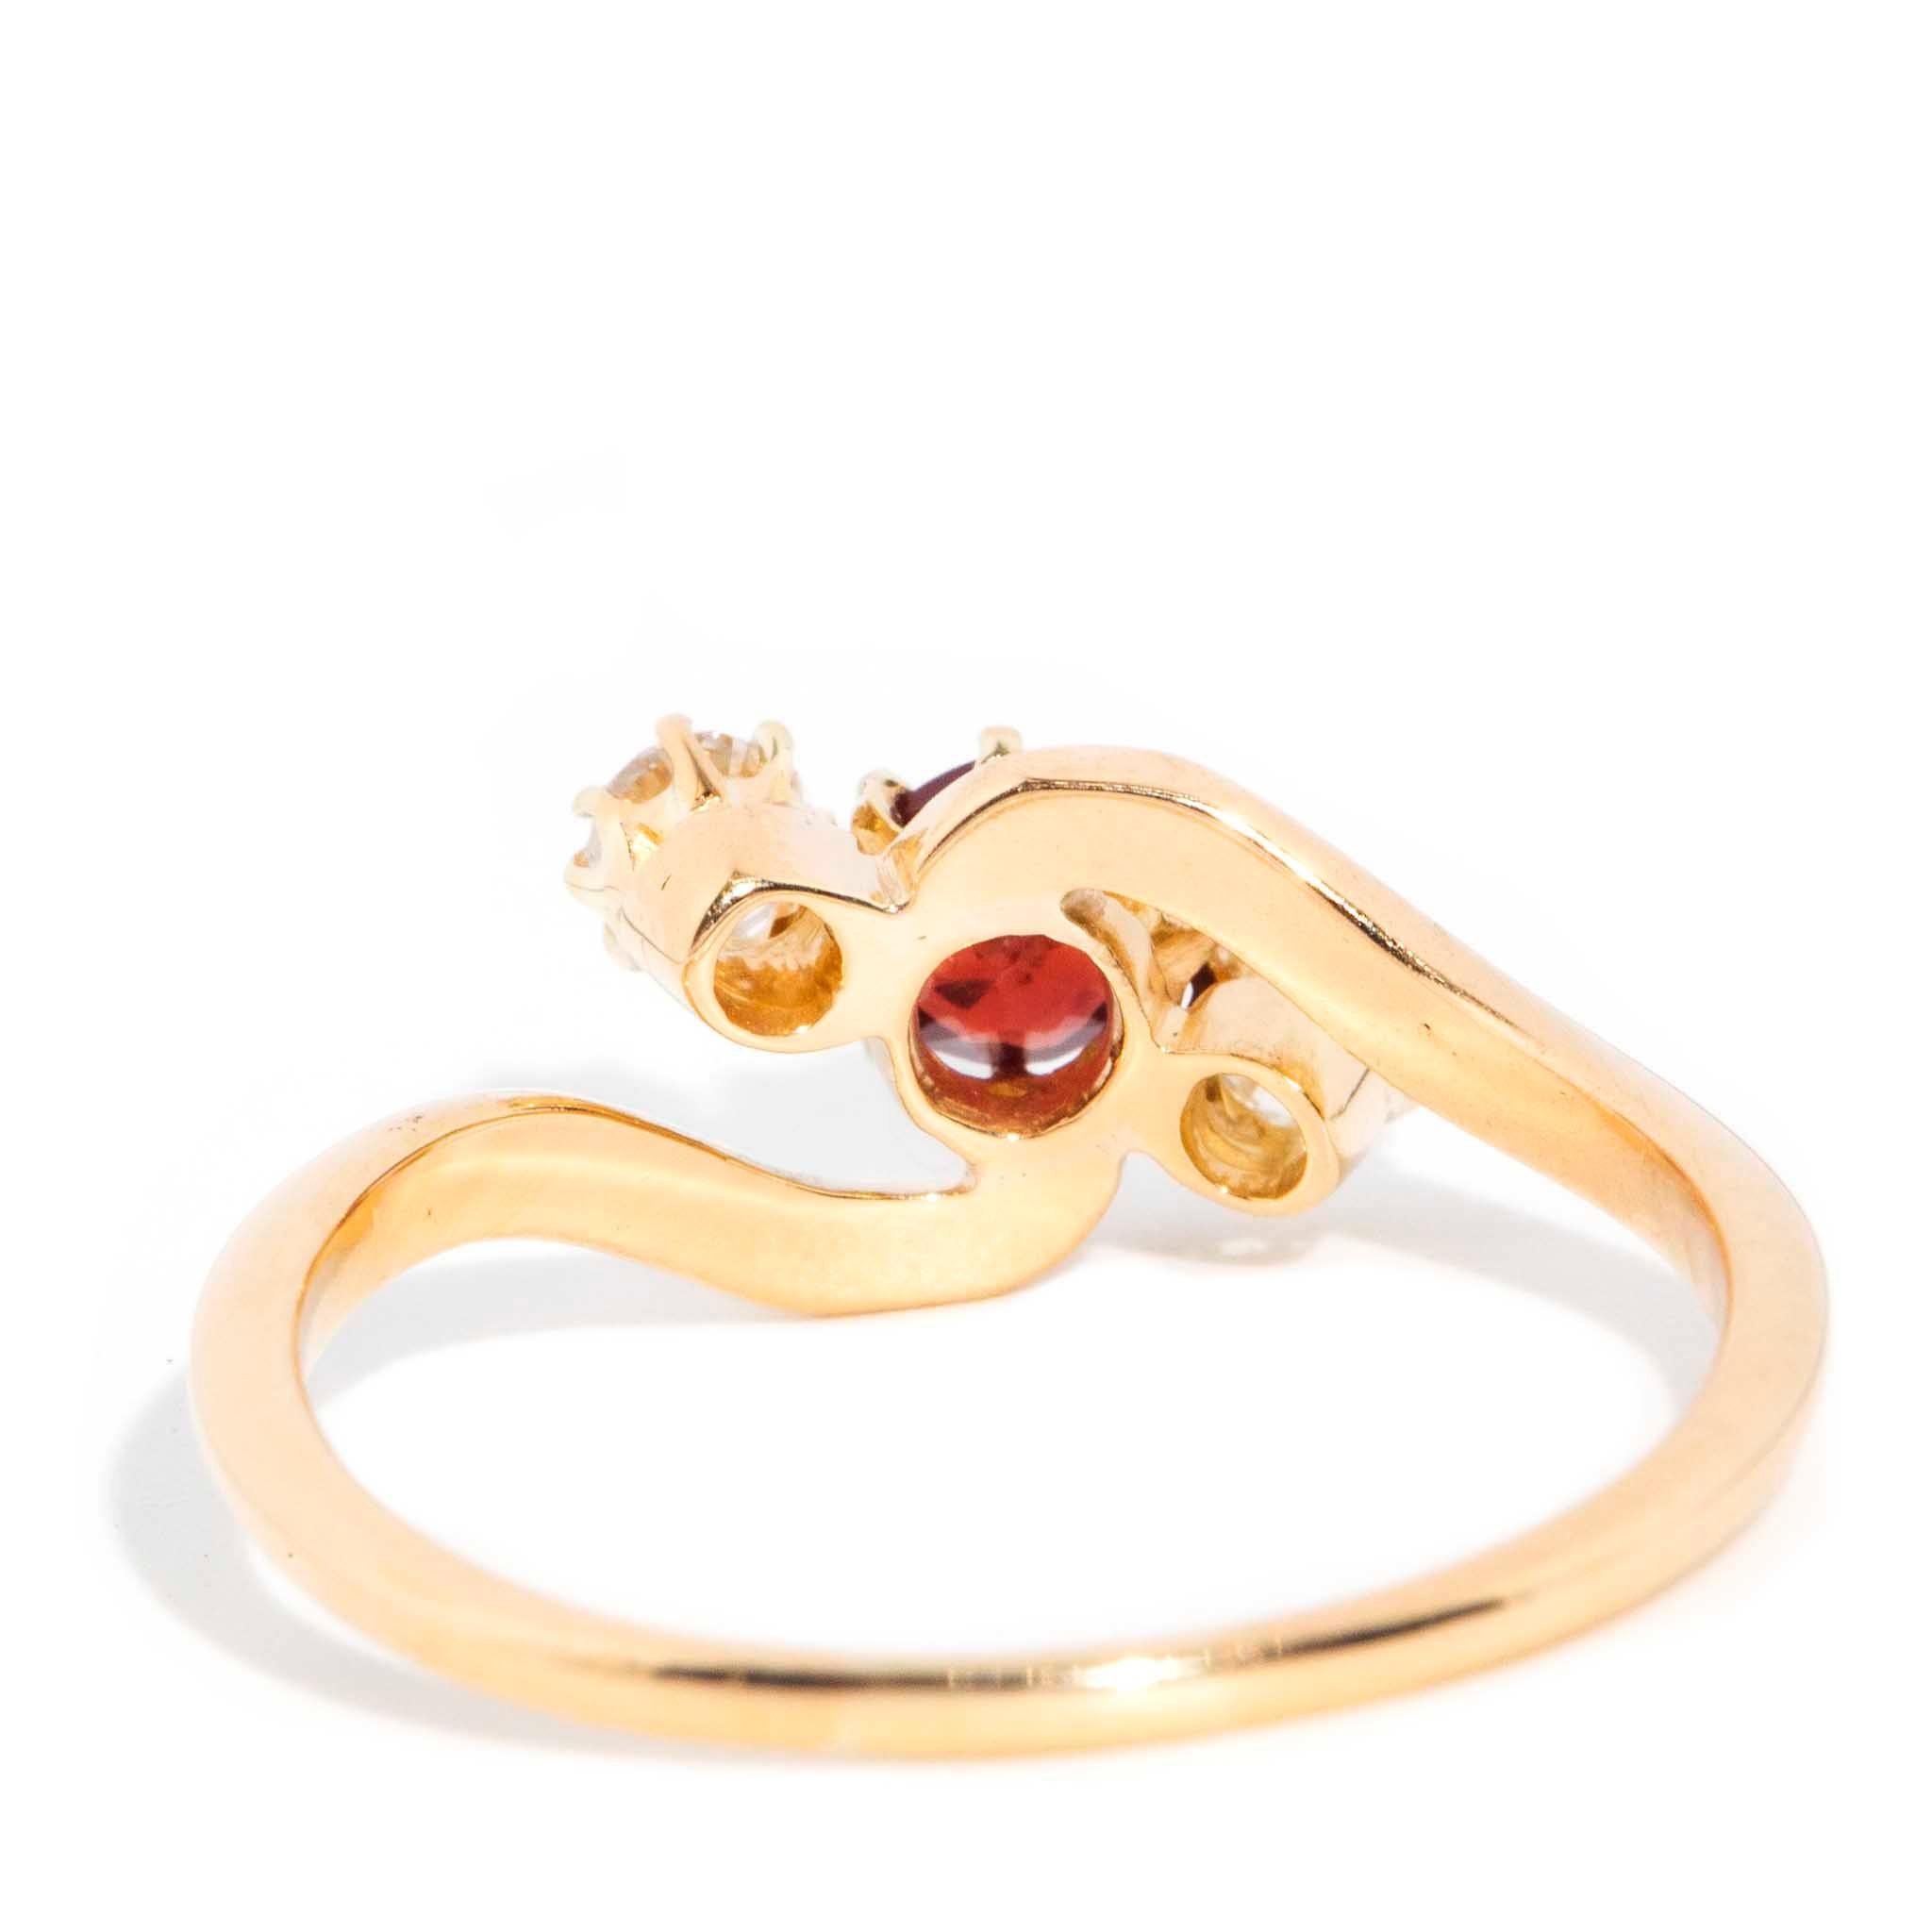 Vintage Circa 1930s Garnet & Old Cut Diamond Crossover Ring 15 Carat Yellow Gold For Sale 2